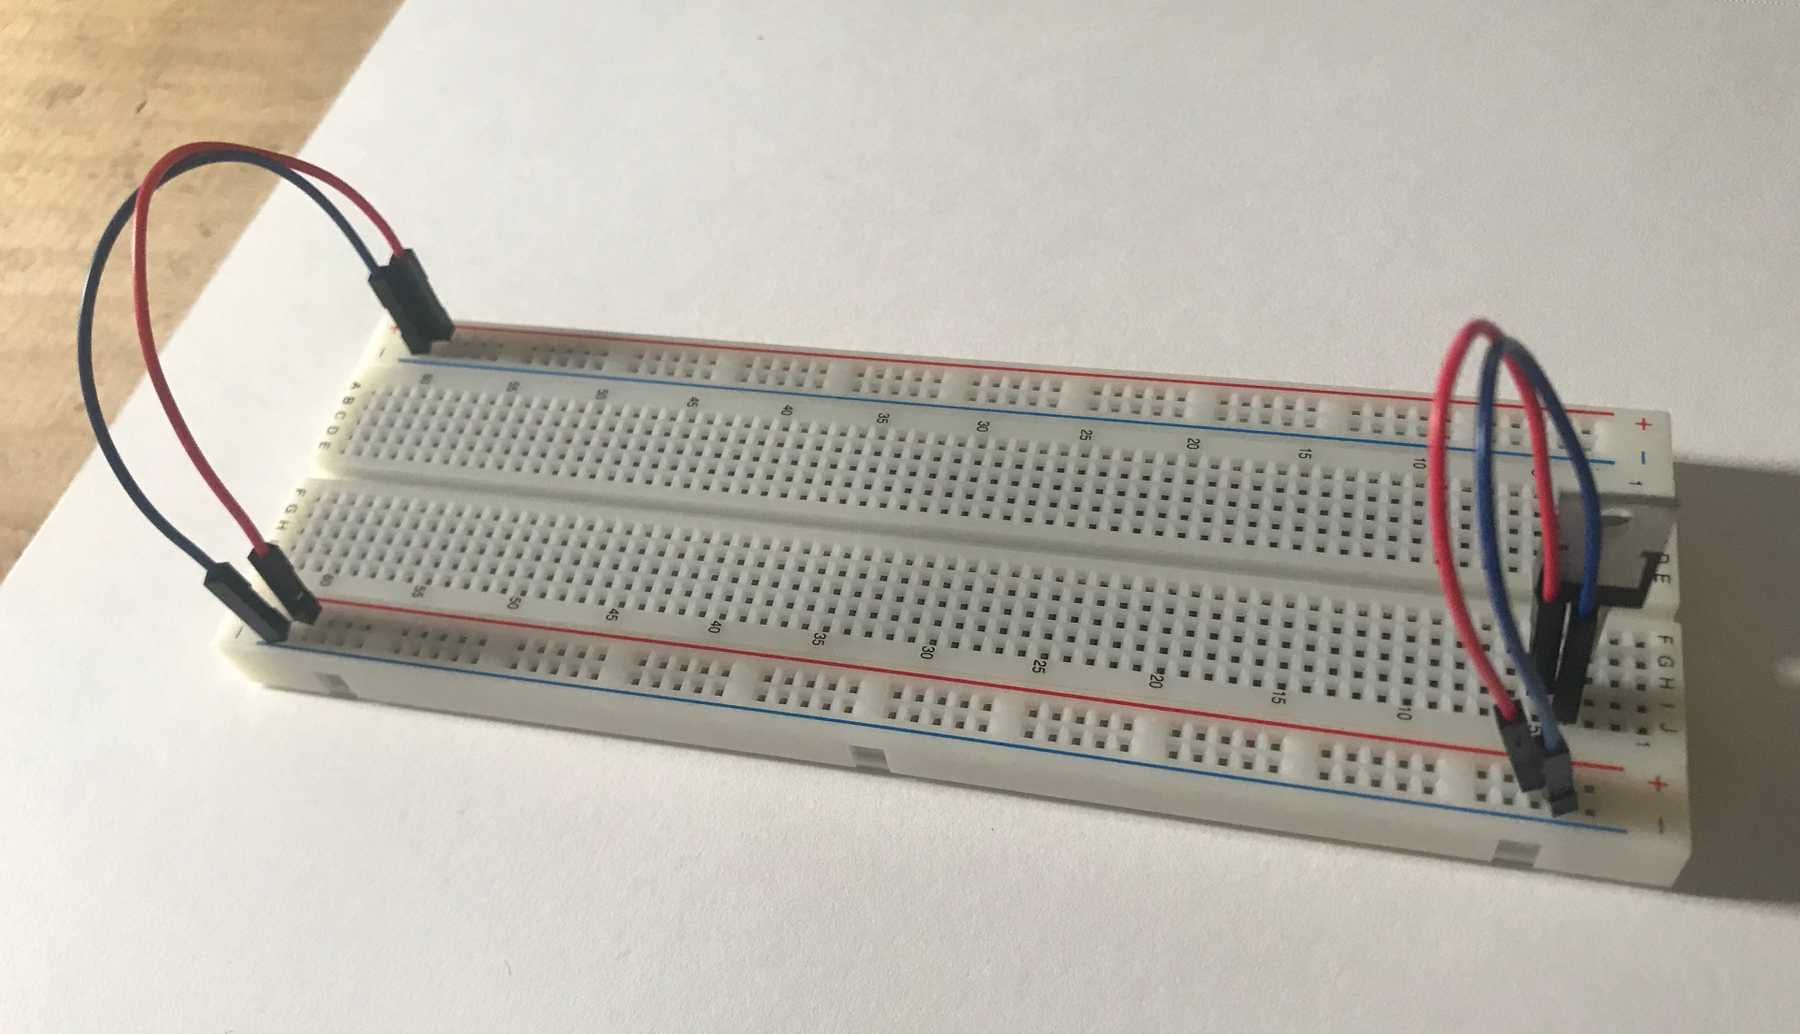 Initial breadboard setup featuring a 5V voltage regulator connected to the breadboard's positive voltage and ground